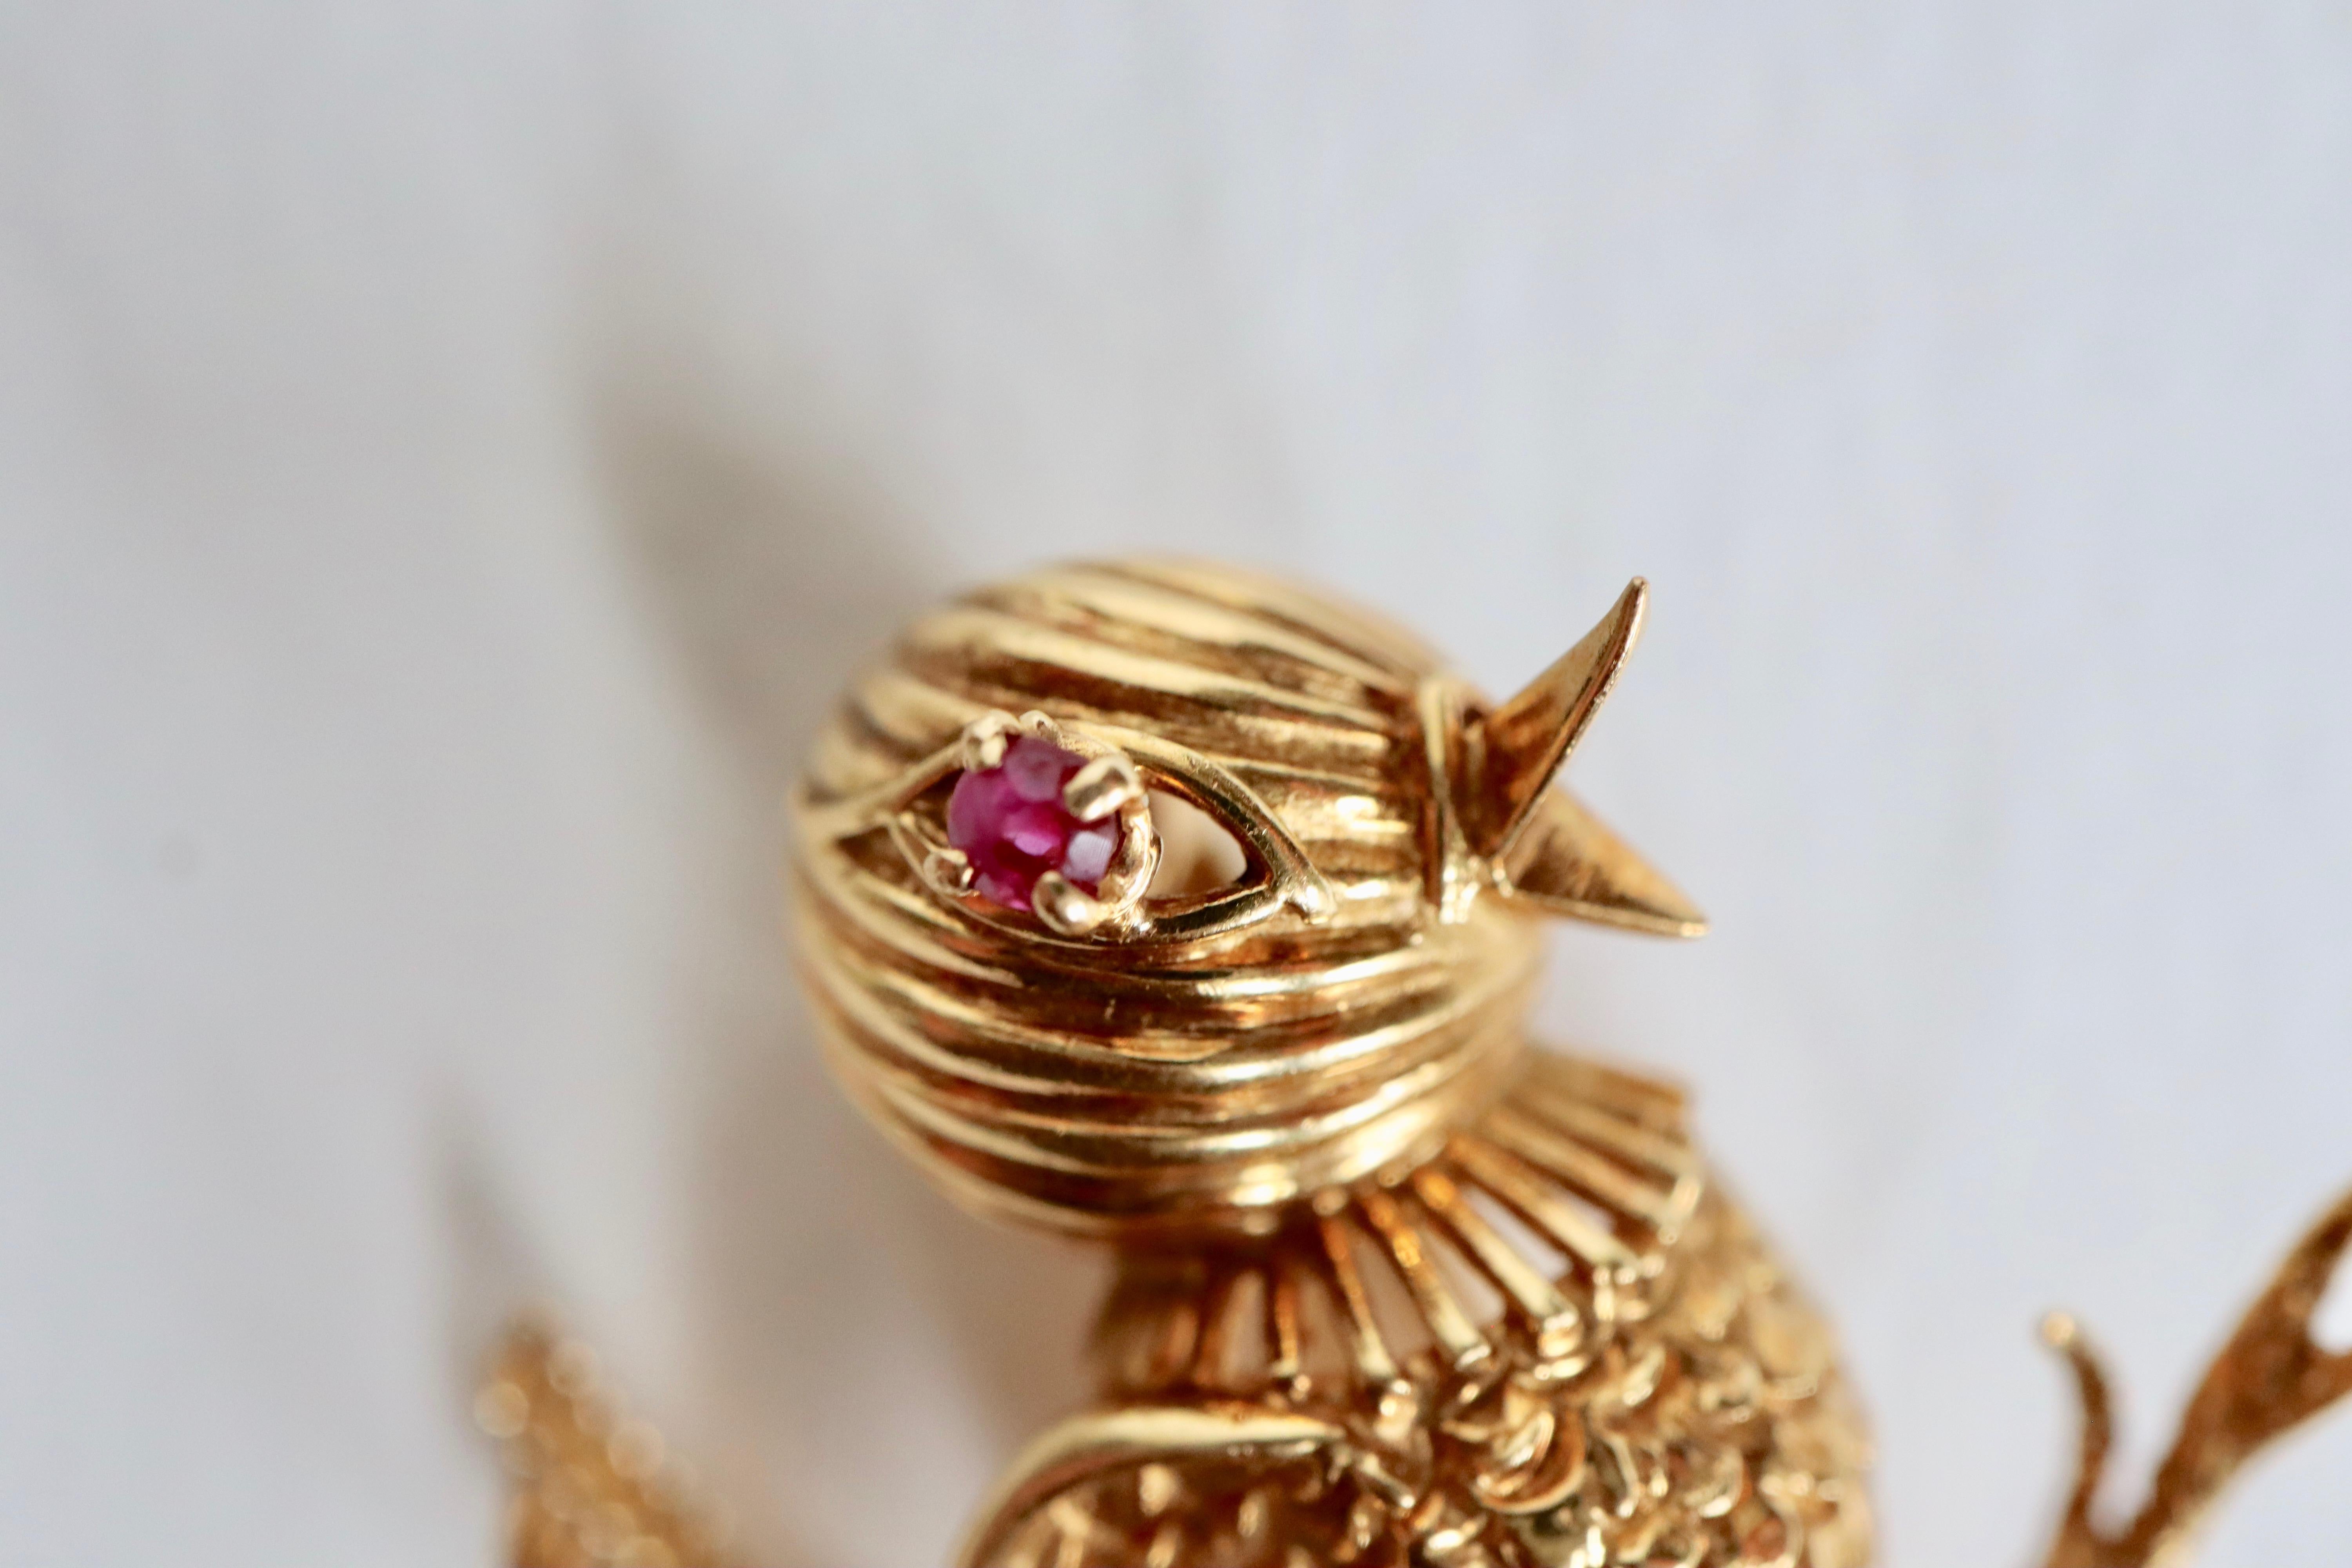 MELLERIO Bird Brooch in 18 kt yellow Gold, the Eye setting a Ruby.
Brooch signed MELLERIO and numbered 
Gross Weight: 7.4 g 
Height: 2.5 cm Width: 3 cm